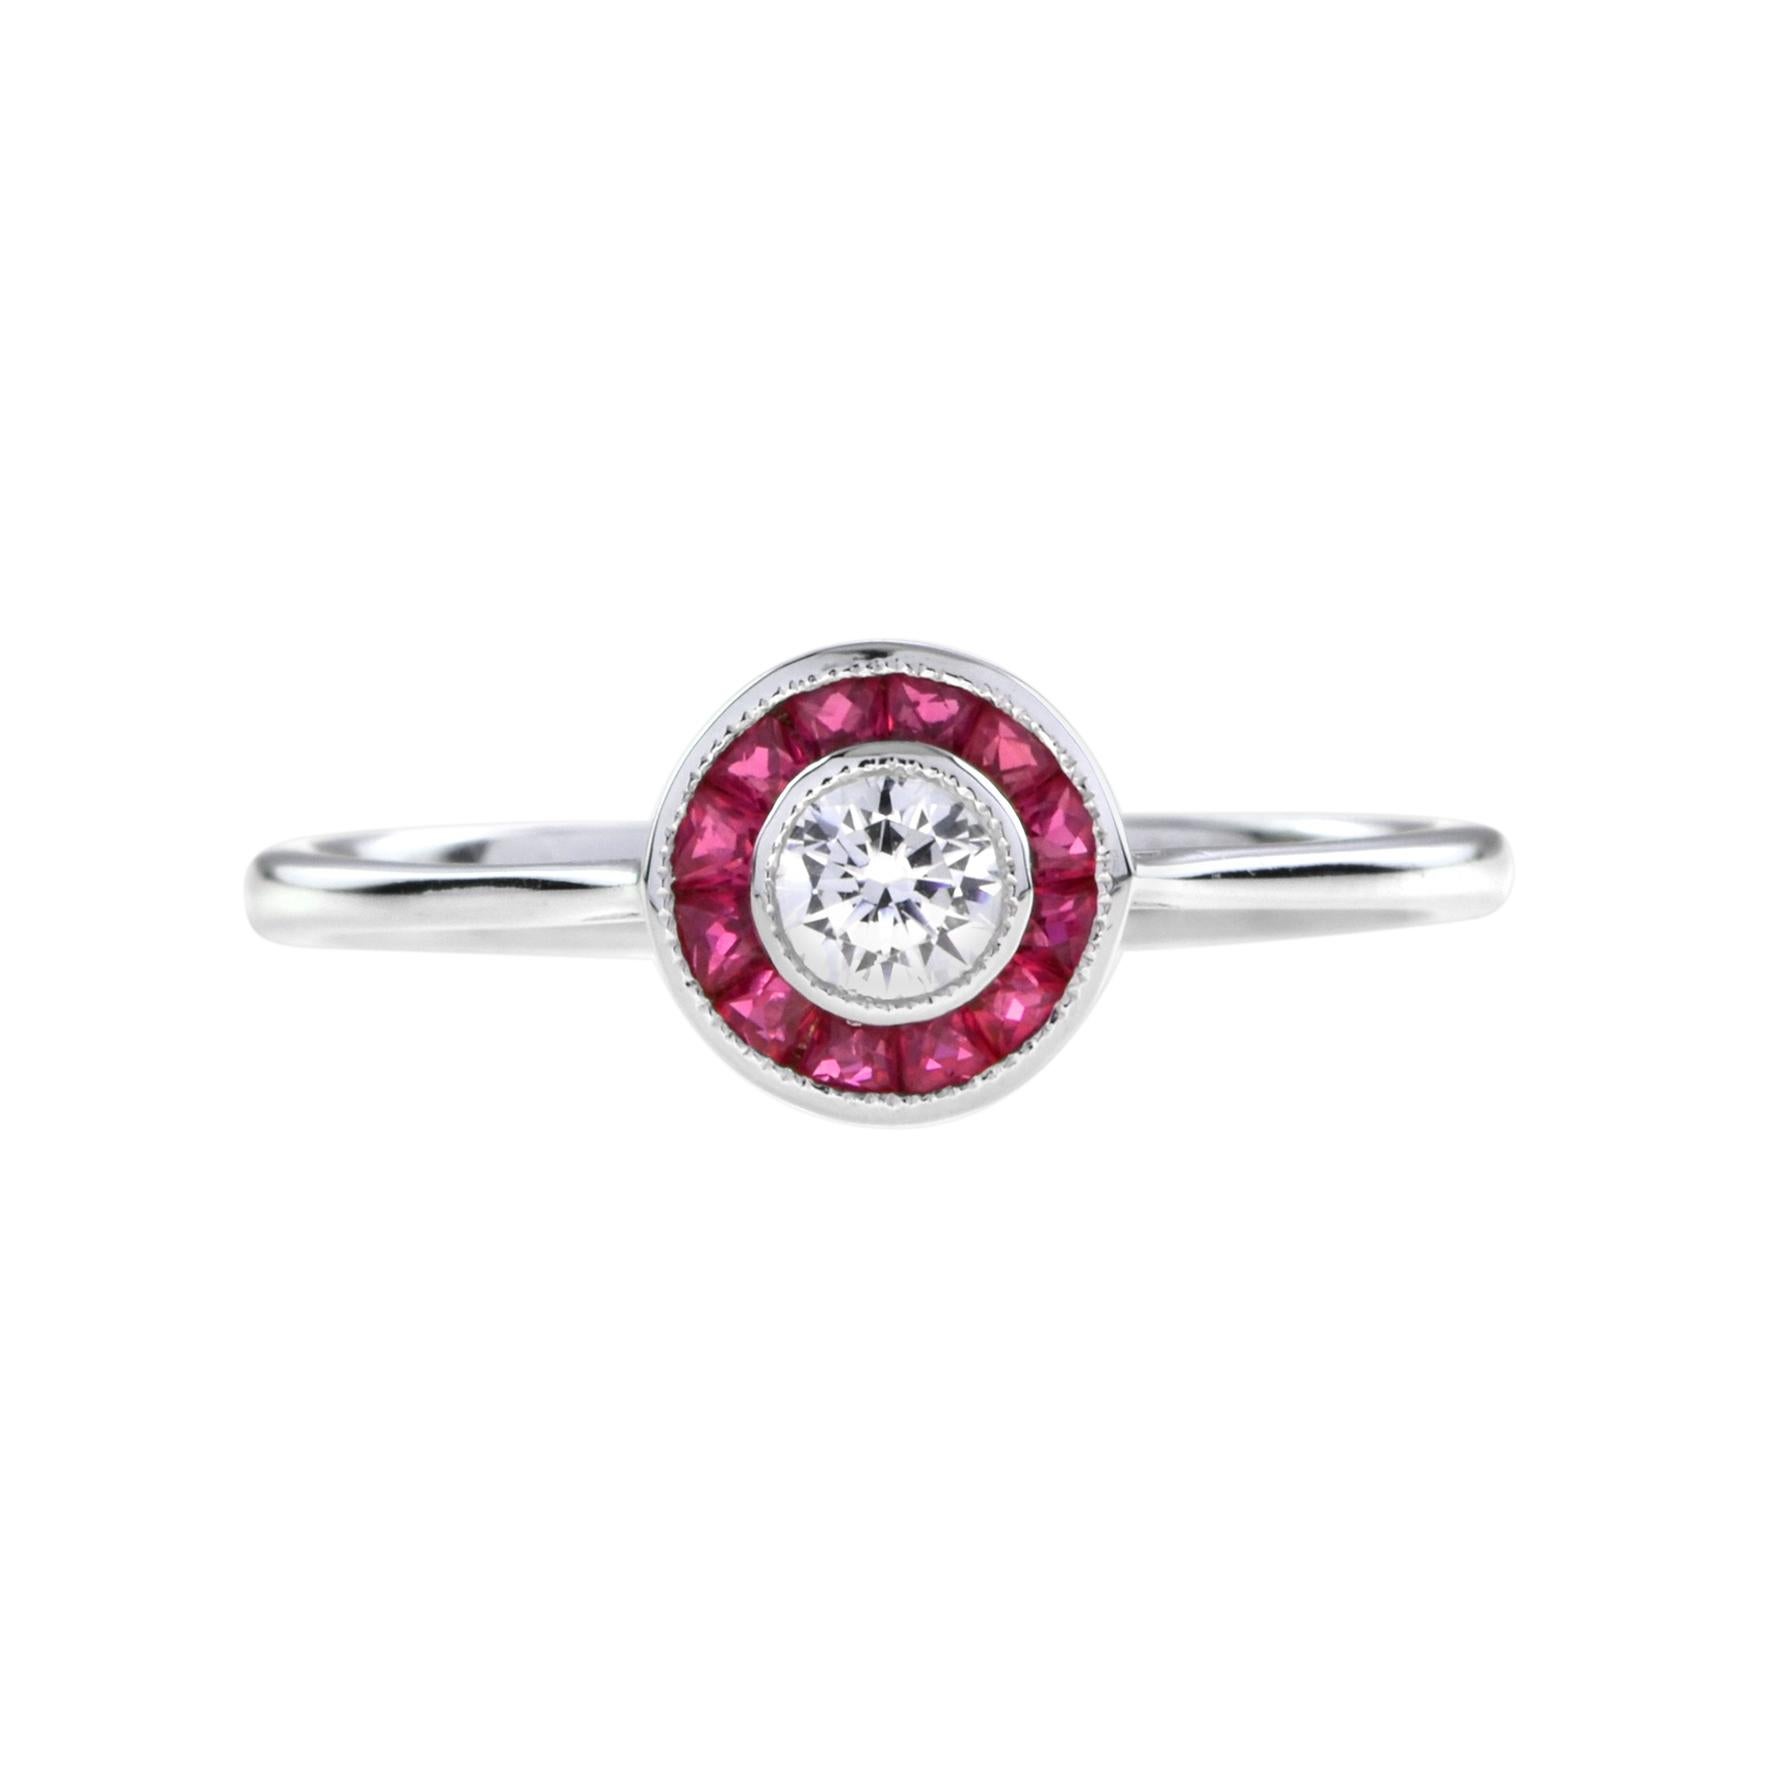 Diamond and ruby target ring and stud earrings, rub-over-set to the center with a round brilliant cut diamond surrounded by French cut rubies, all set in 18k white gold. Gorgeous diamond and ruby target set, made in the style of Art Deco ring and